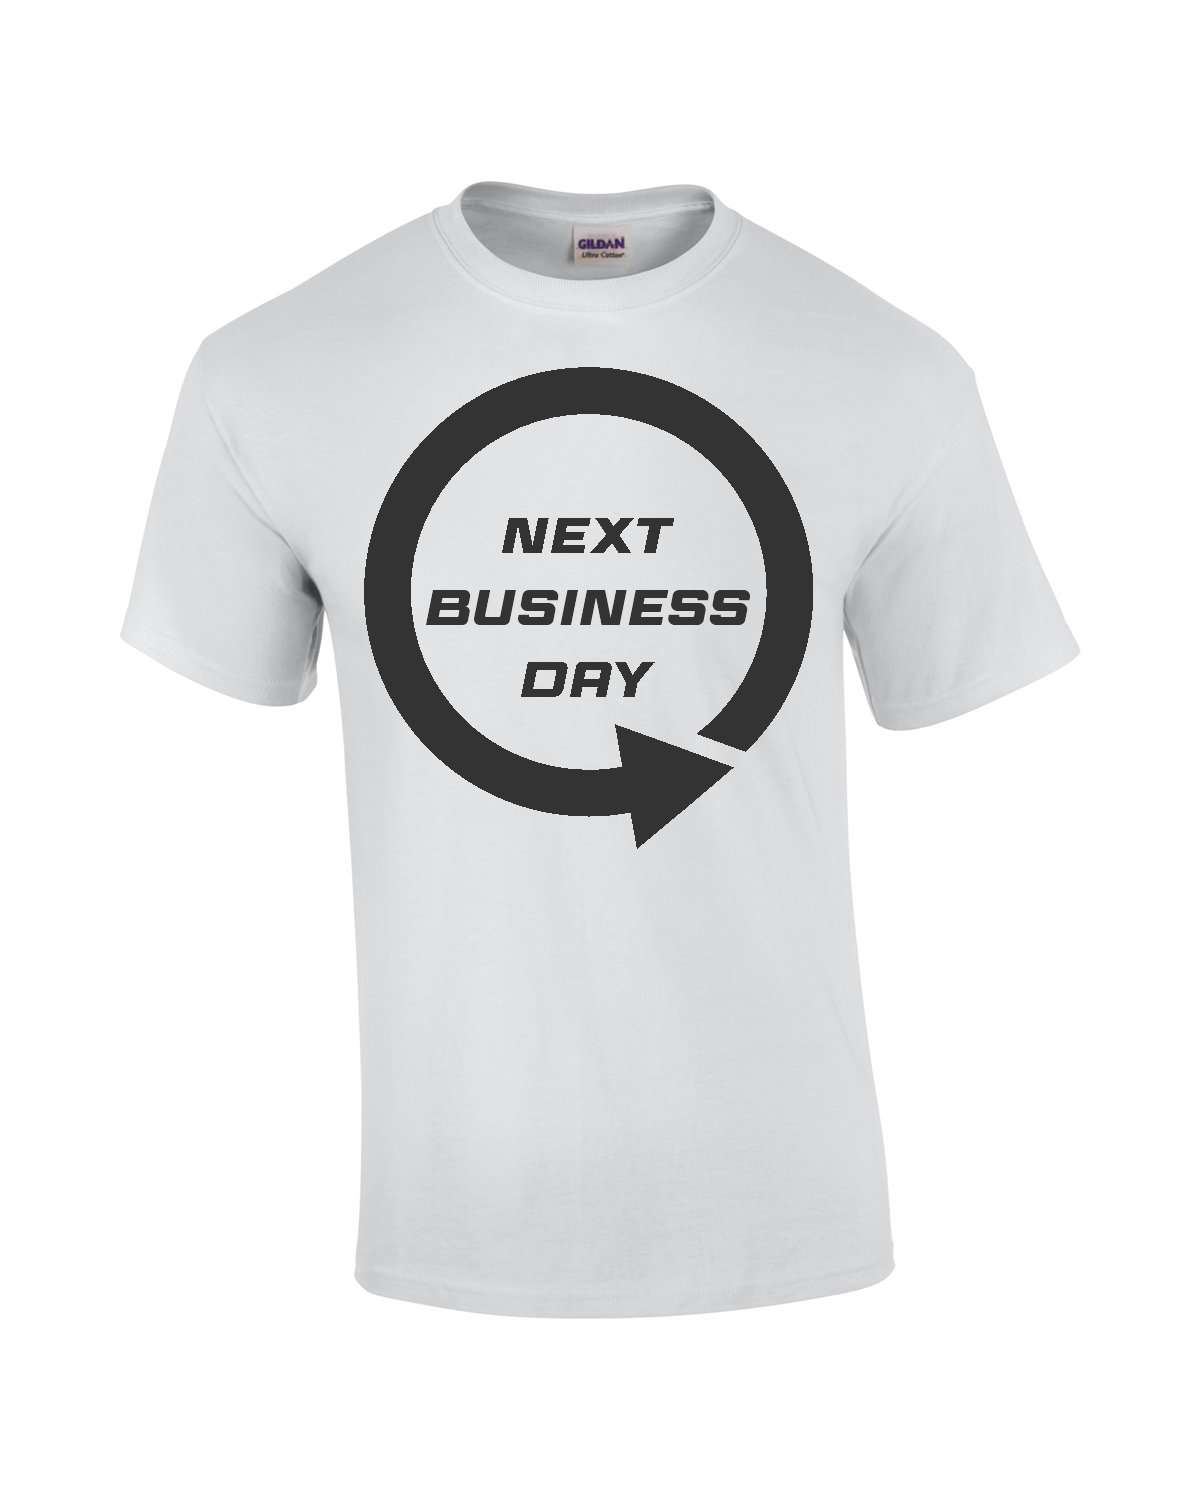 Next Business Day Turnaround (order by 4pm)